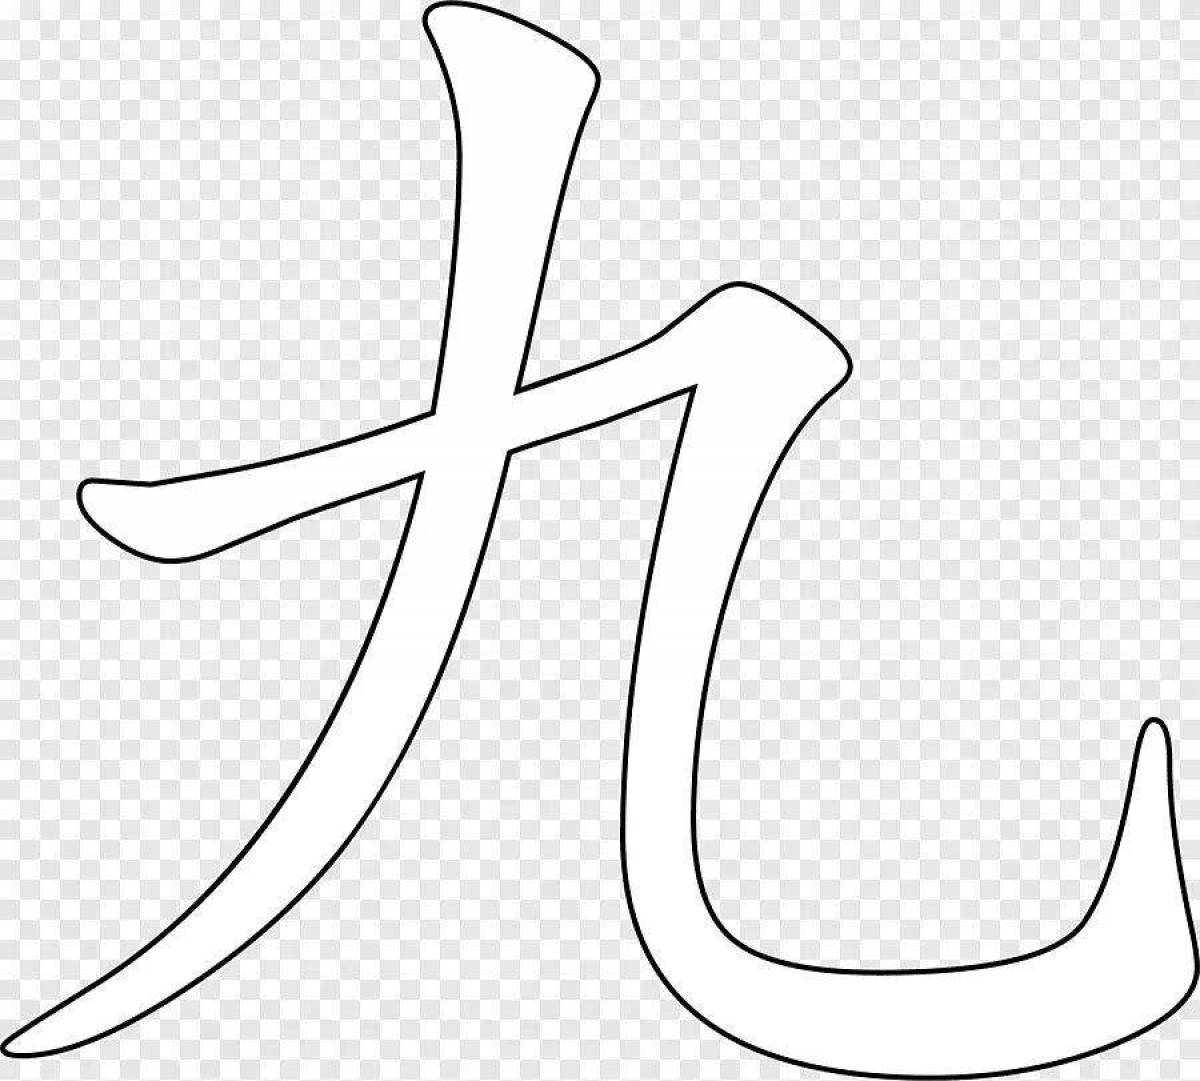 Fun coloring of Chinese characters